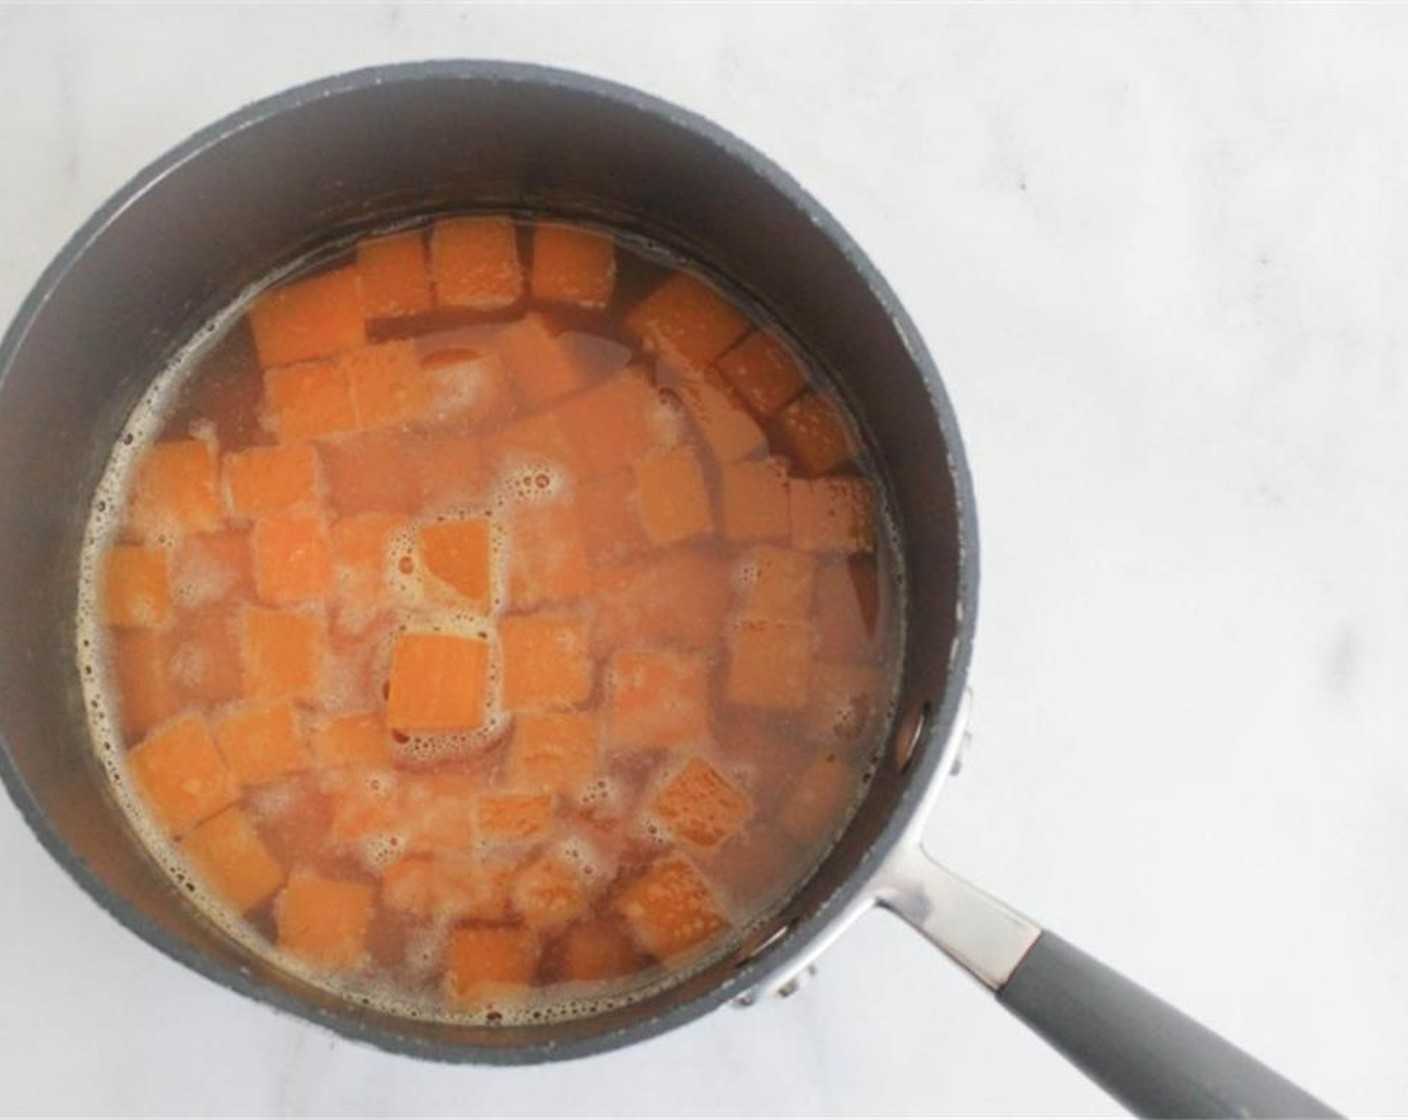 step 2 Place cubed Butternut Squash (4 cups) in a medium pot. Add Low-Sodium Chicken Broth (3 cups). Bring to a boil then lower to a simmer. Cook for 20-25 minutes until tender.